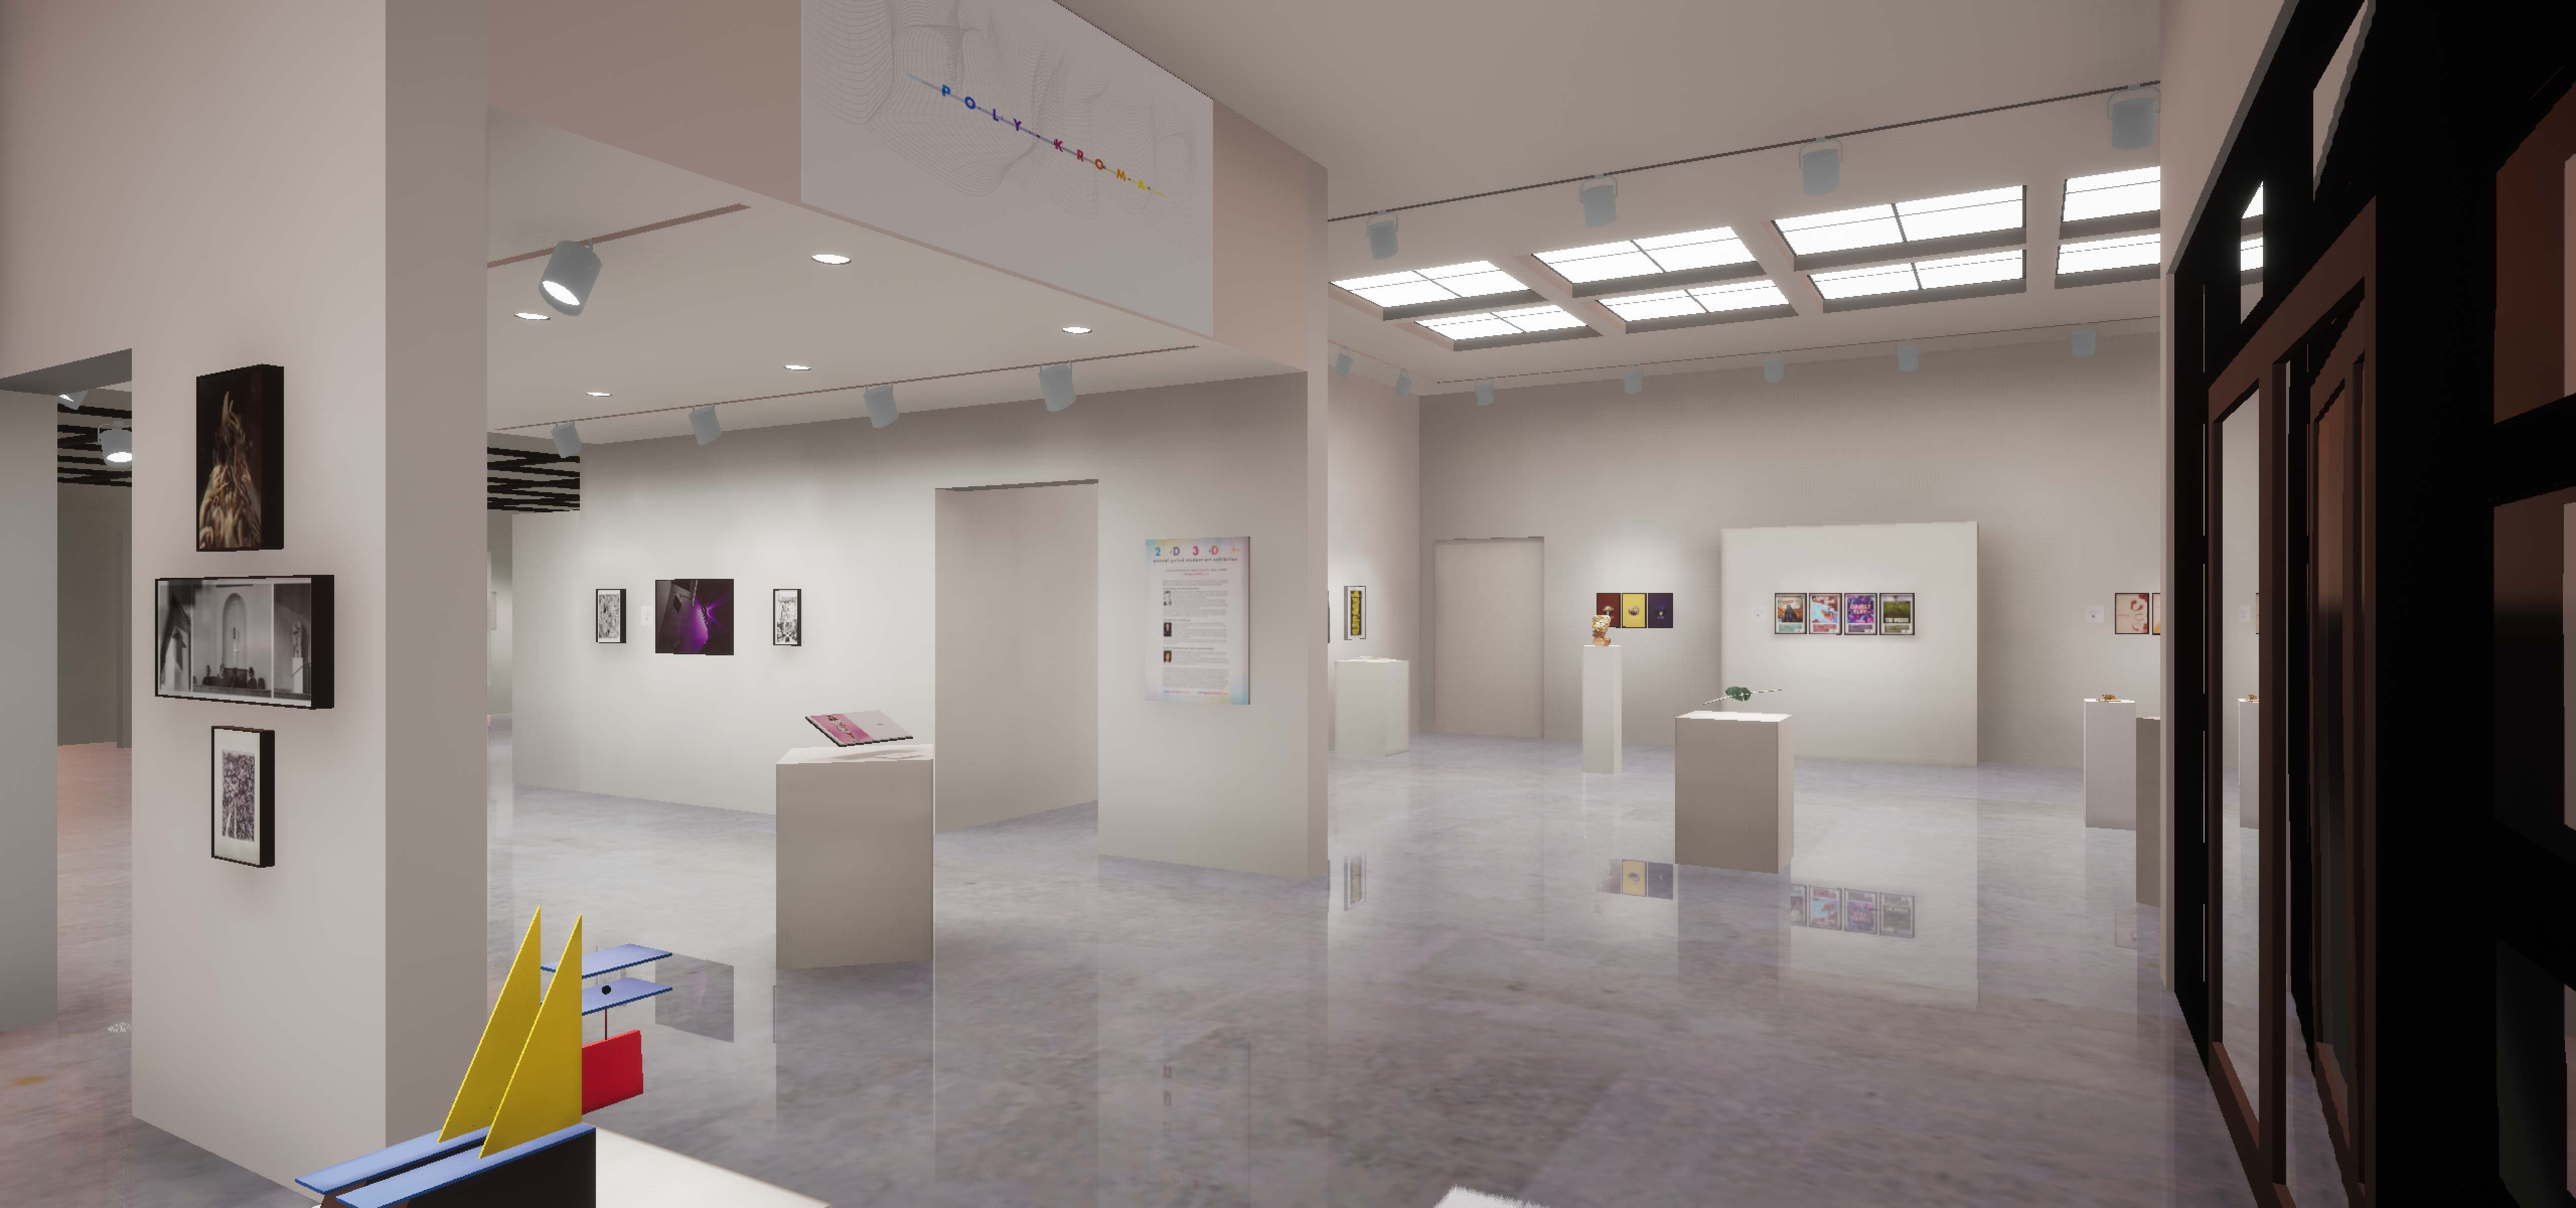 Image of virtual 3d gallery. Title wall reads "PolyKroma 2020". Various sculptures and 2d work are in gallery space.